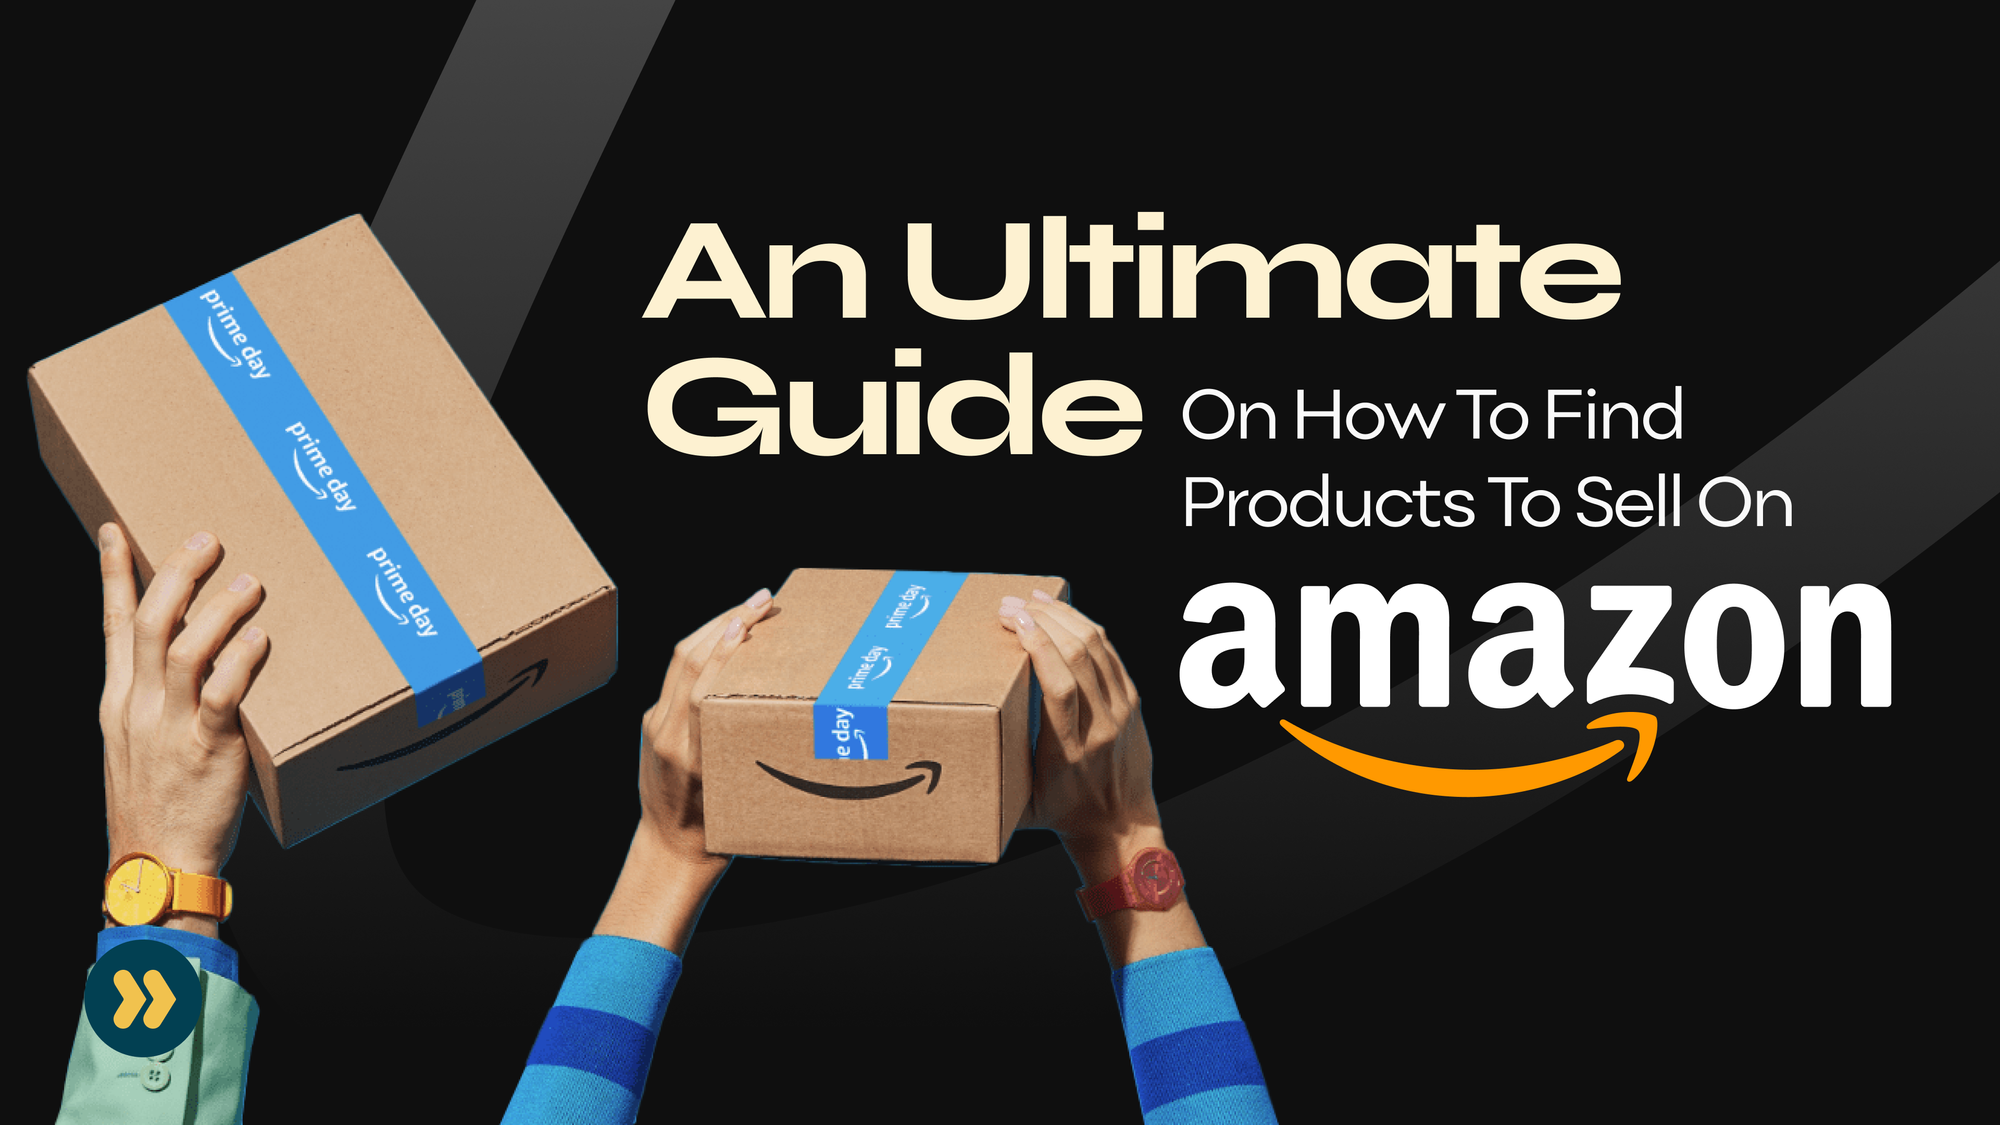 An Ultimate Guide on How To Find Products To Sell On Amazon